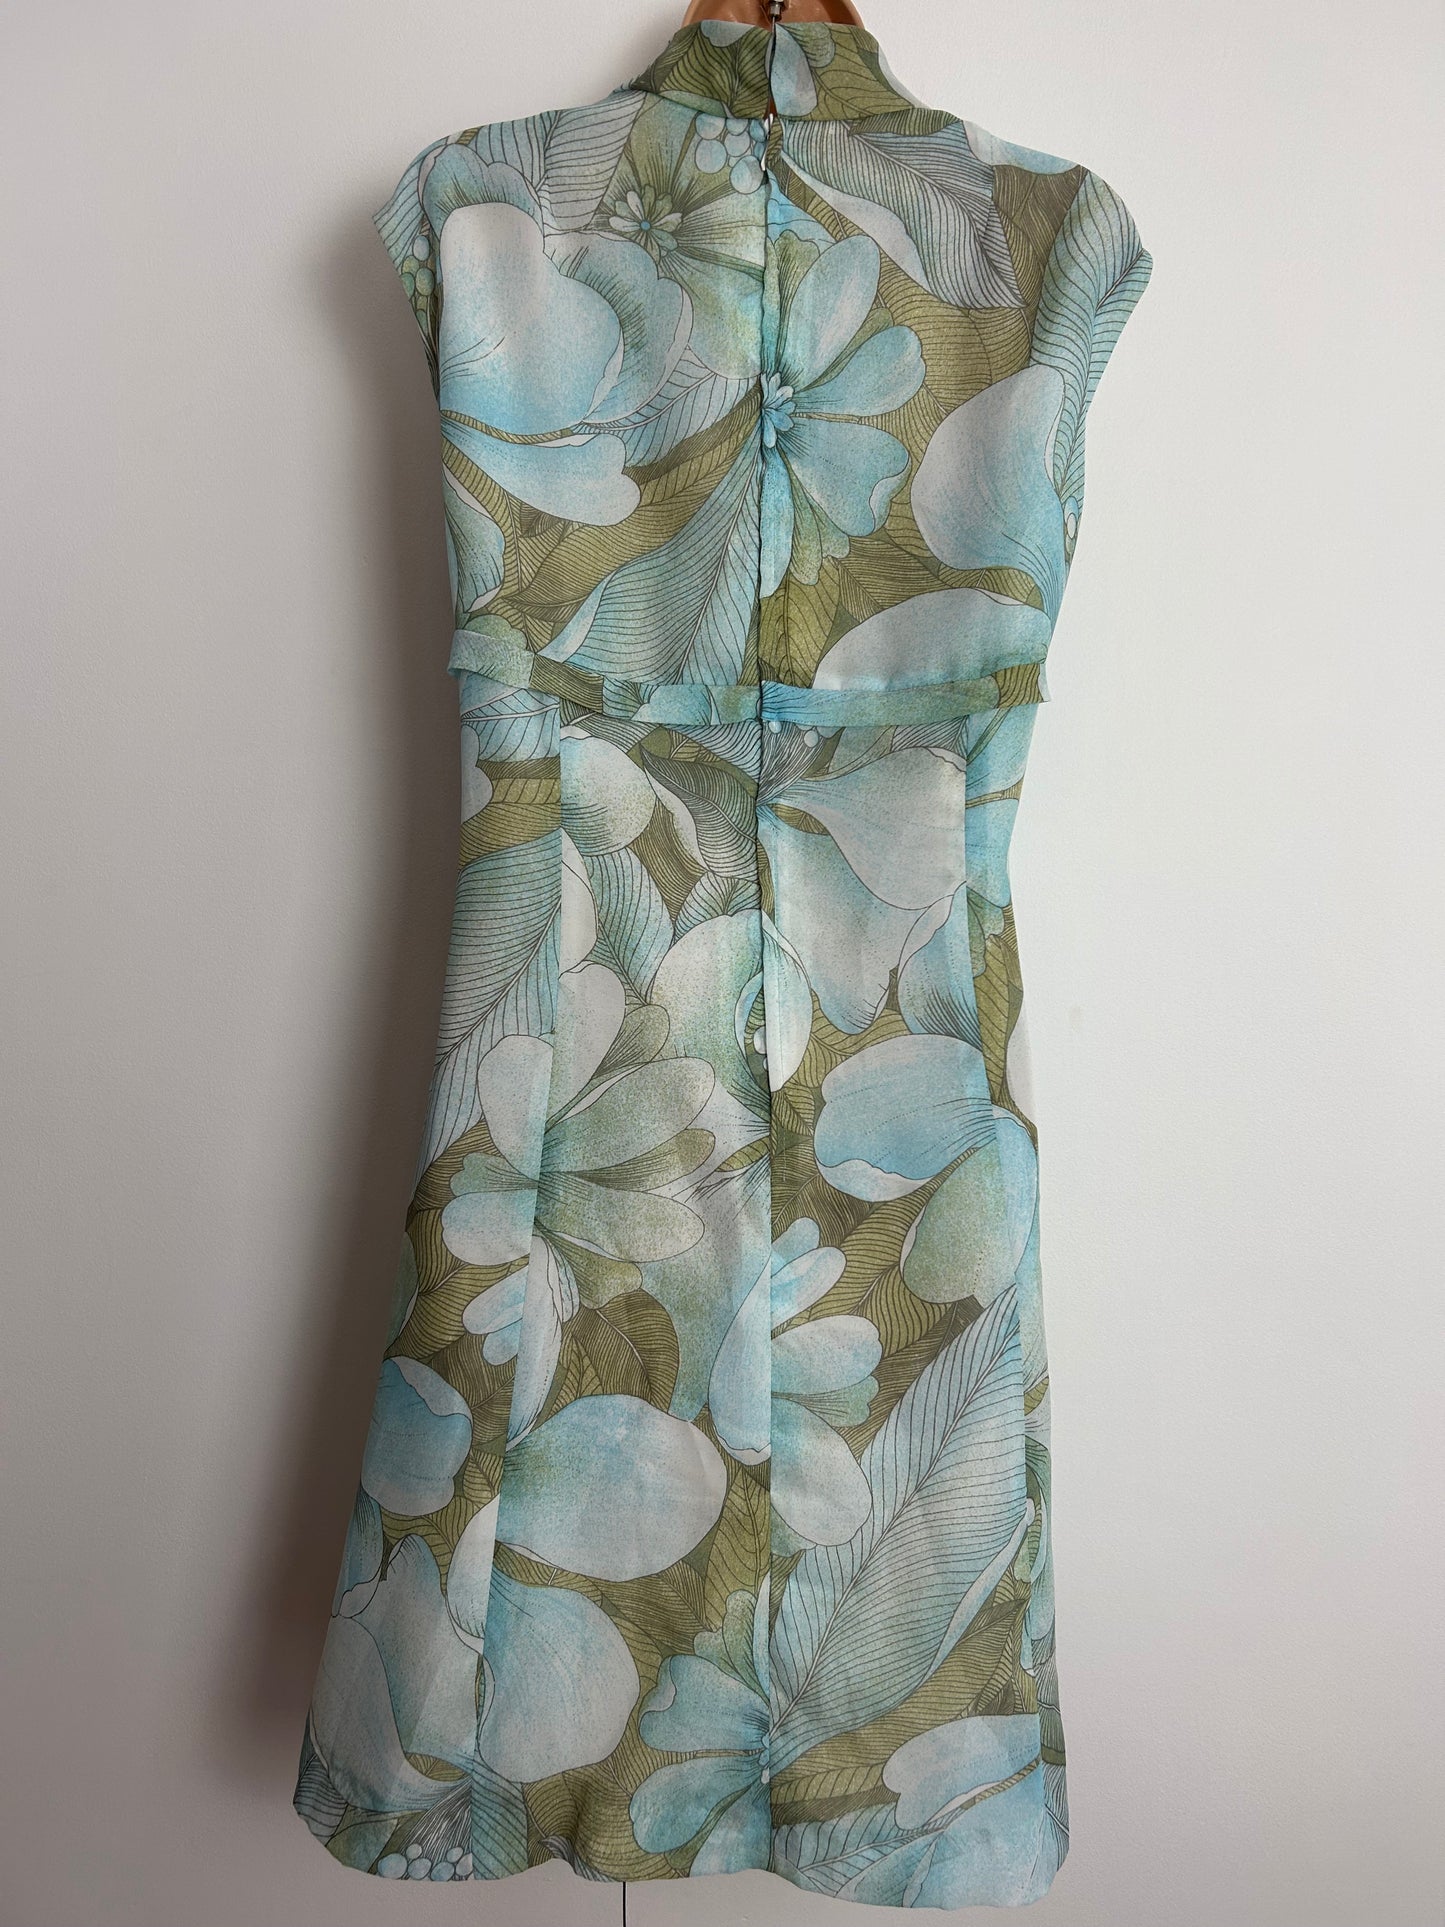 Vintage Early 1970s UK Size 14 Pretty Pale Blue & Green Floral Print Sleeveless Summer Occasion Dress